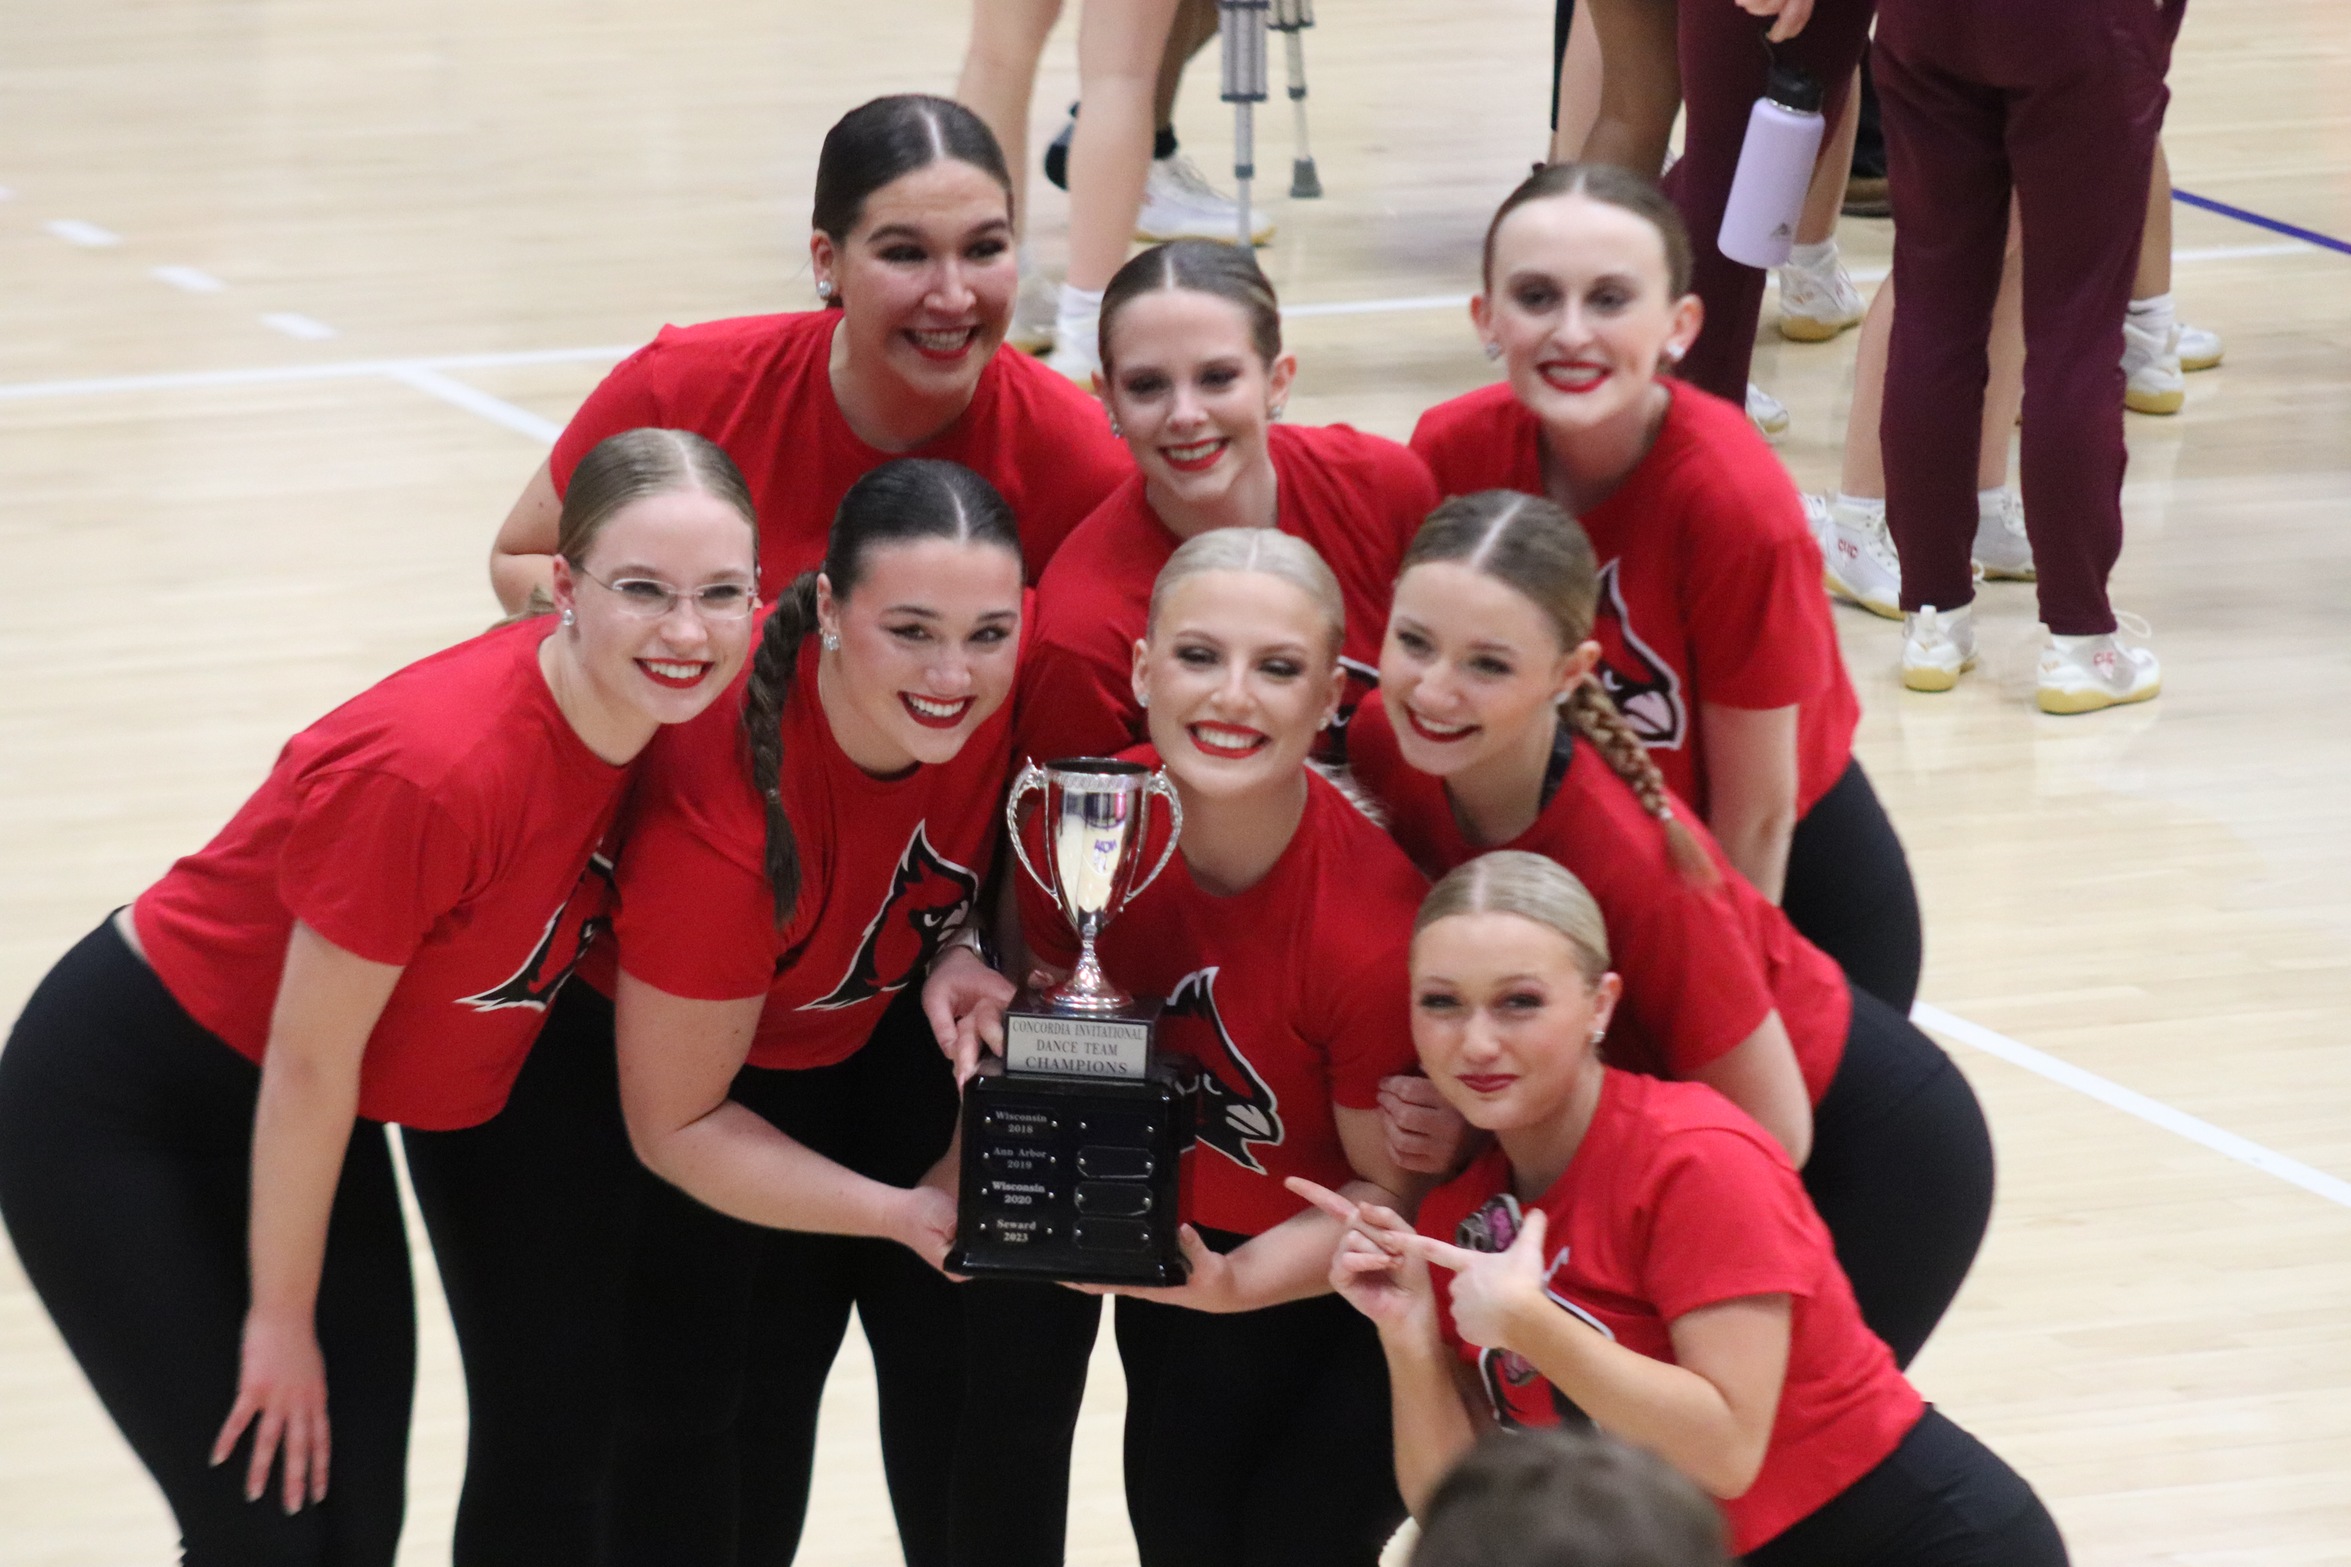 Dance earns their second CIT title